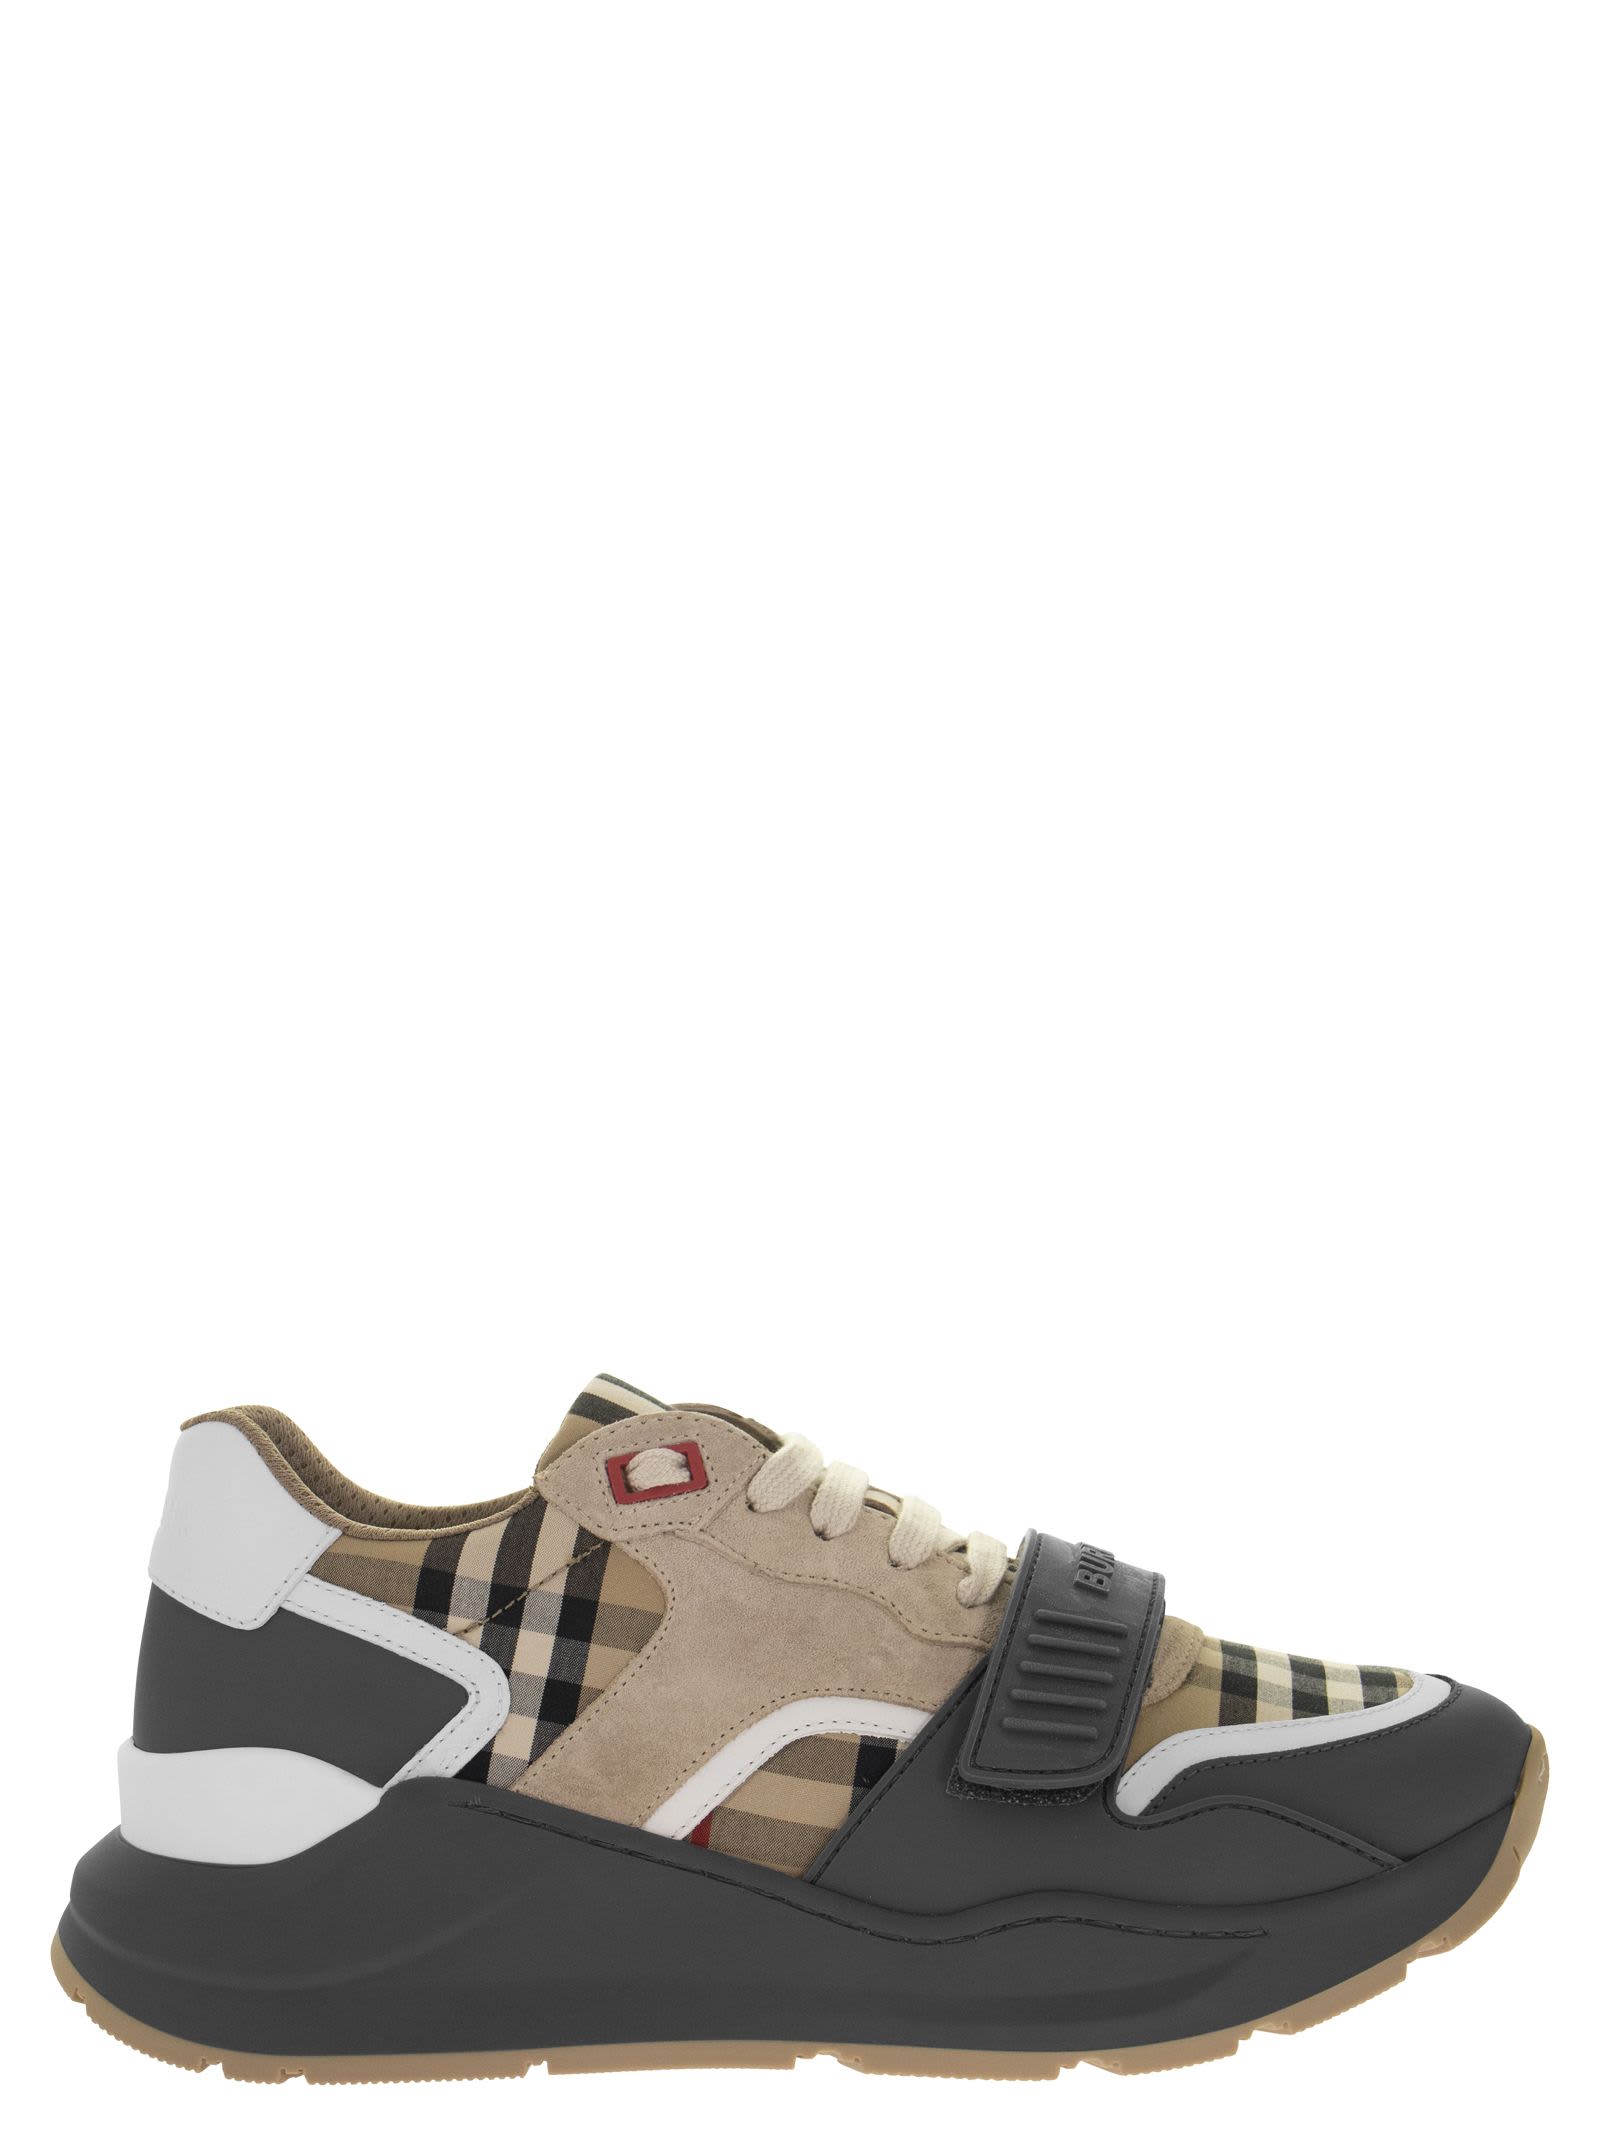 Burberry Vintage Check, Suede And Leather Sneakers